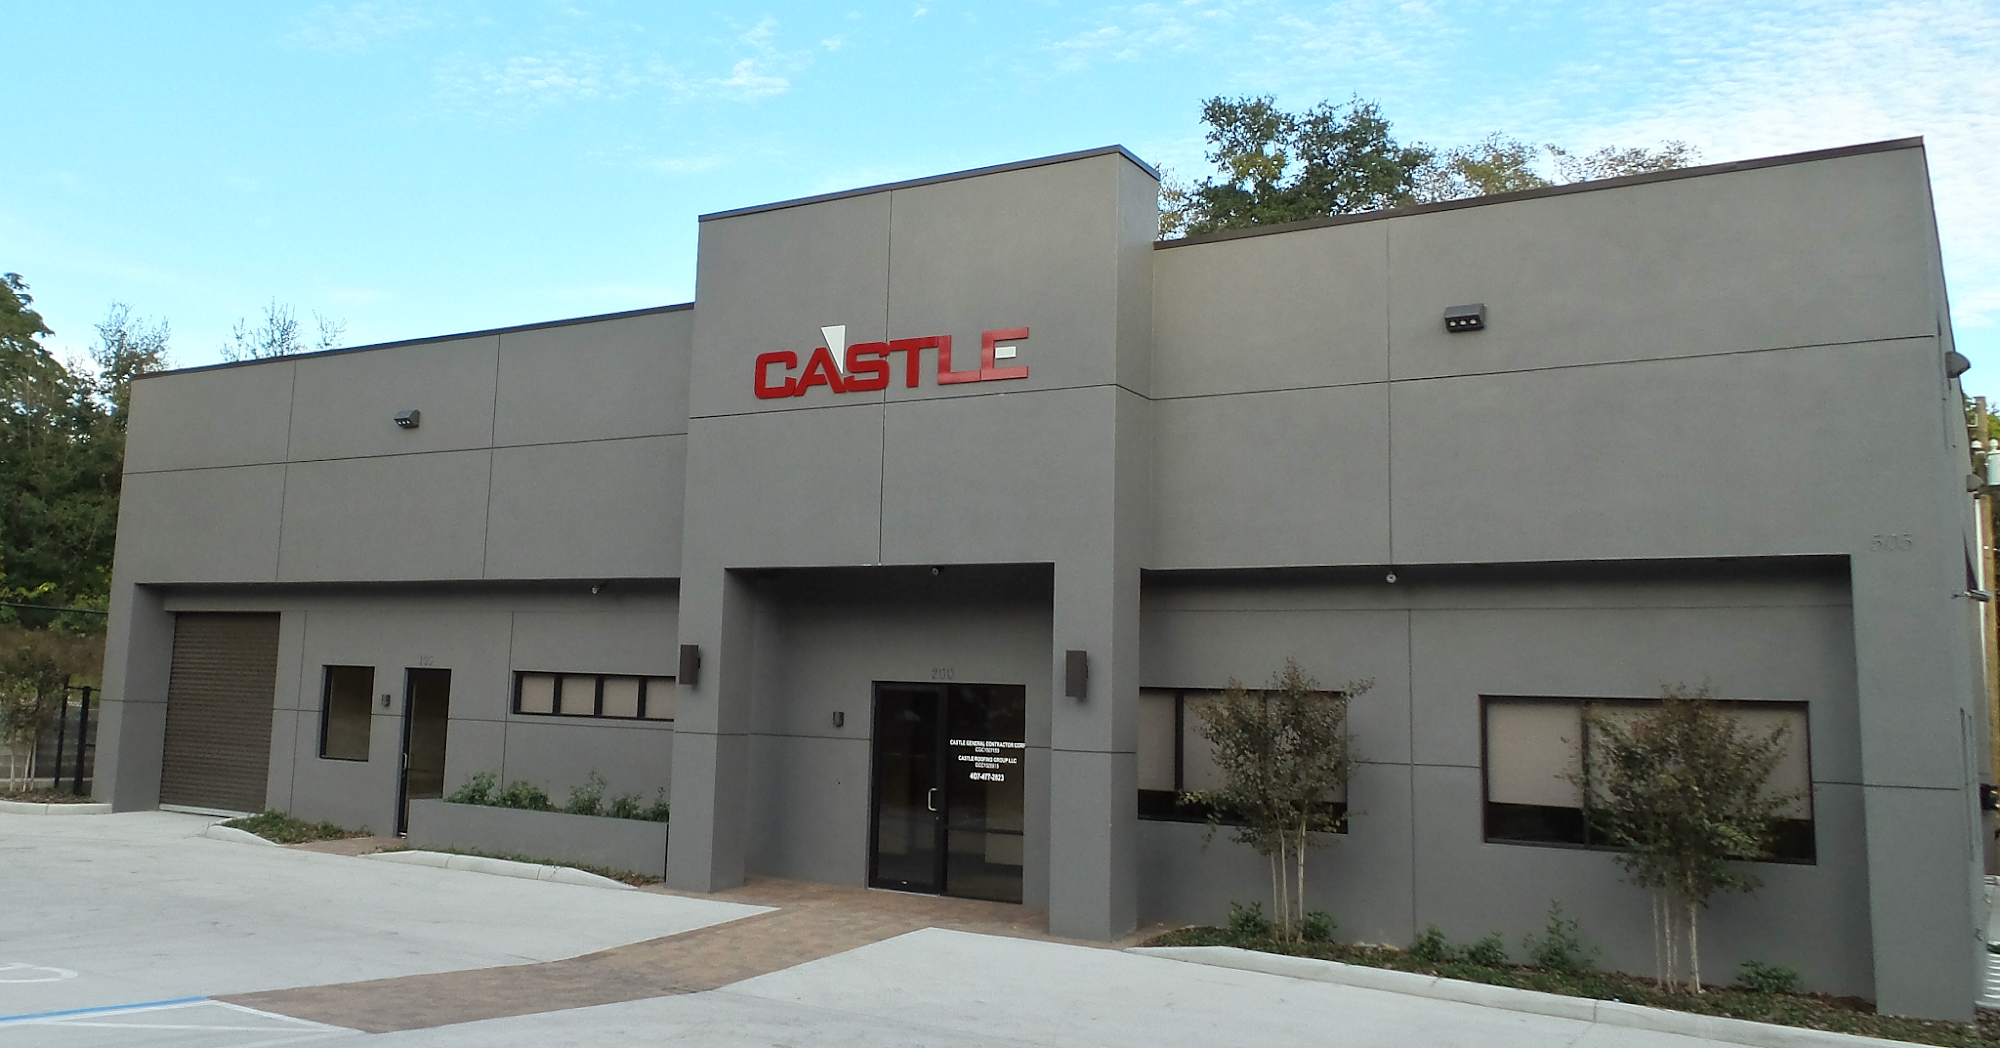 Castle Roofing Group, LLC